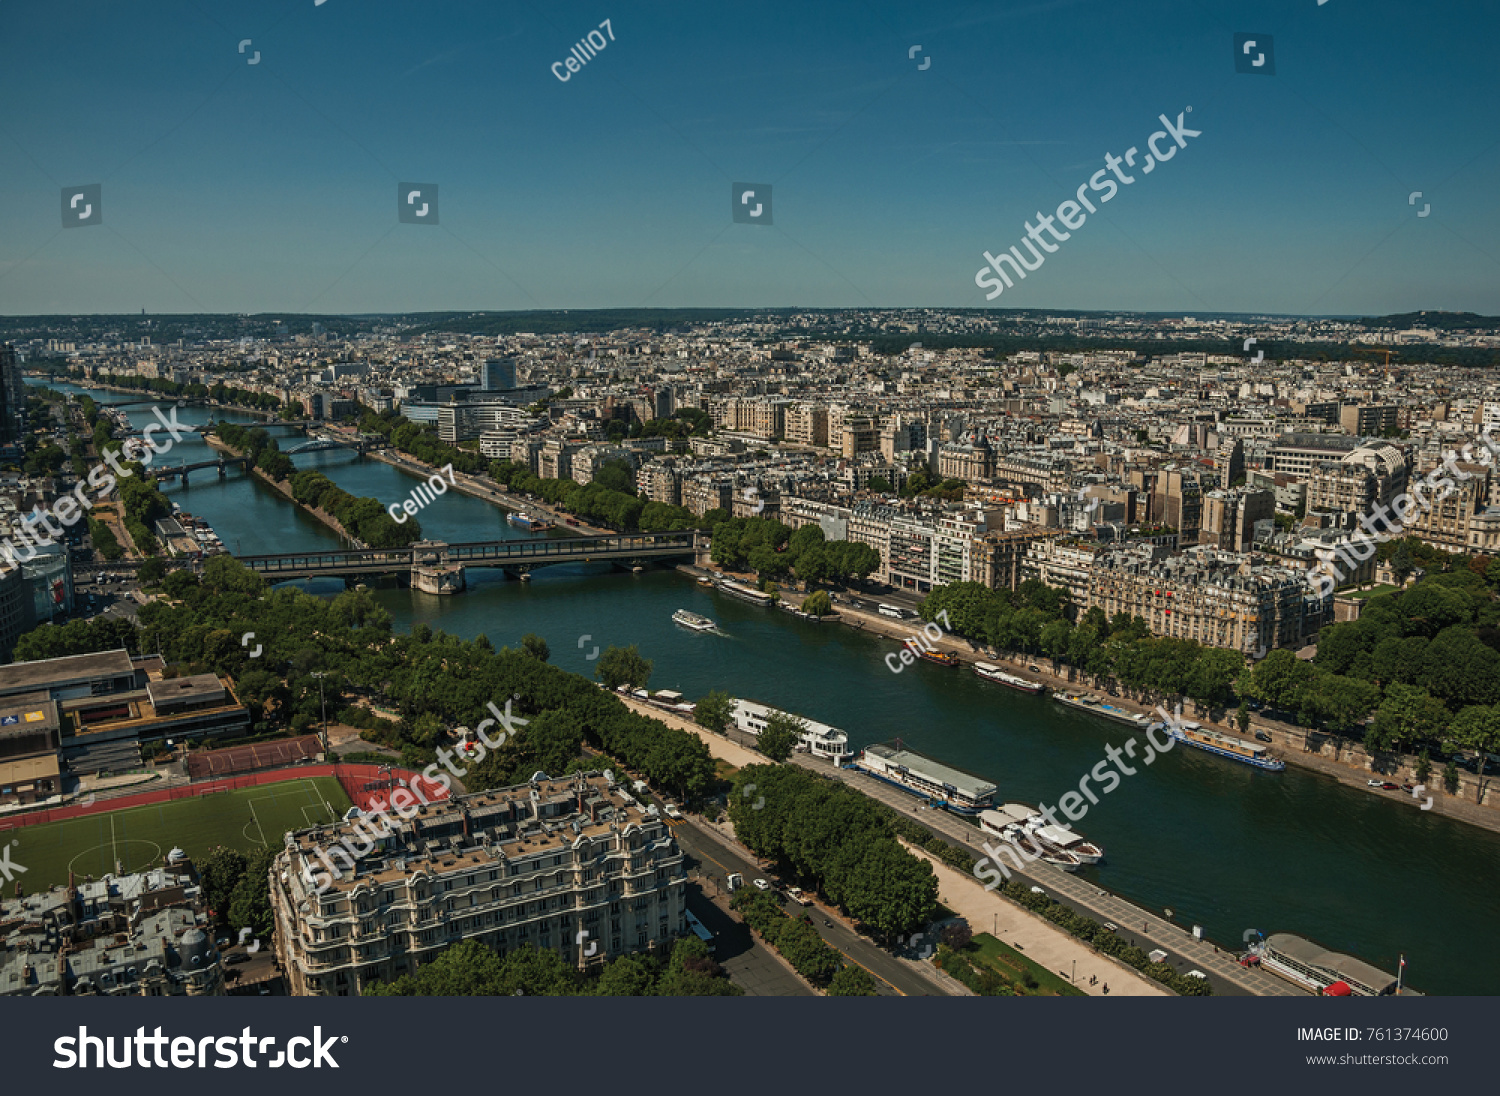 Skyline, River Seine, greenery and buildings under blue sky, seen from the Eiffel Tower in Paris. Known as the “City of Light”, is one of the most impressive world’s cultural center. Northern France. #761374600